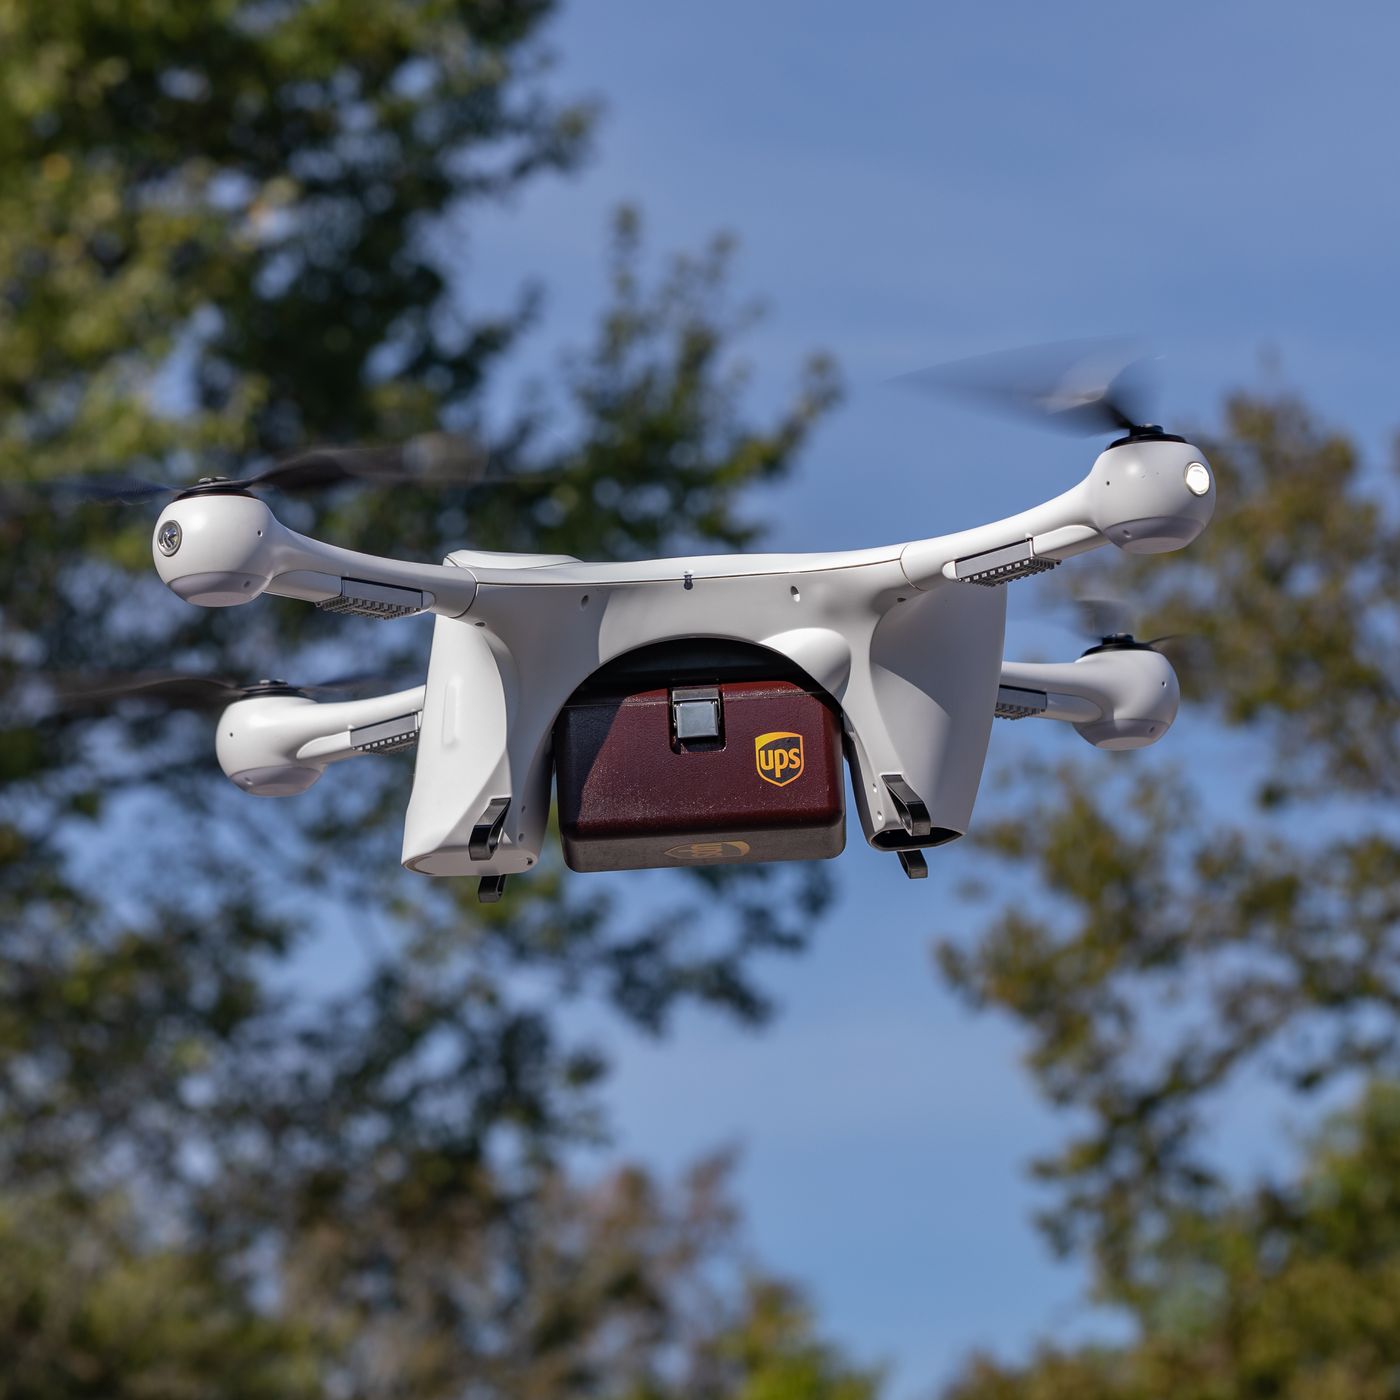 Le Grand Jardin Baume Les Messieurs Charmant Ups Delivers Prescription Medications to Us Homes by Drone